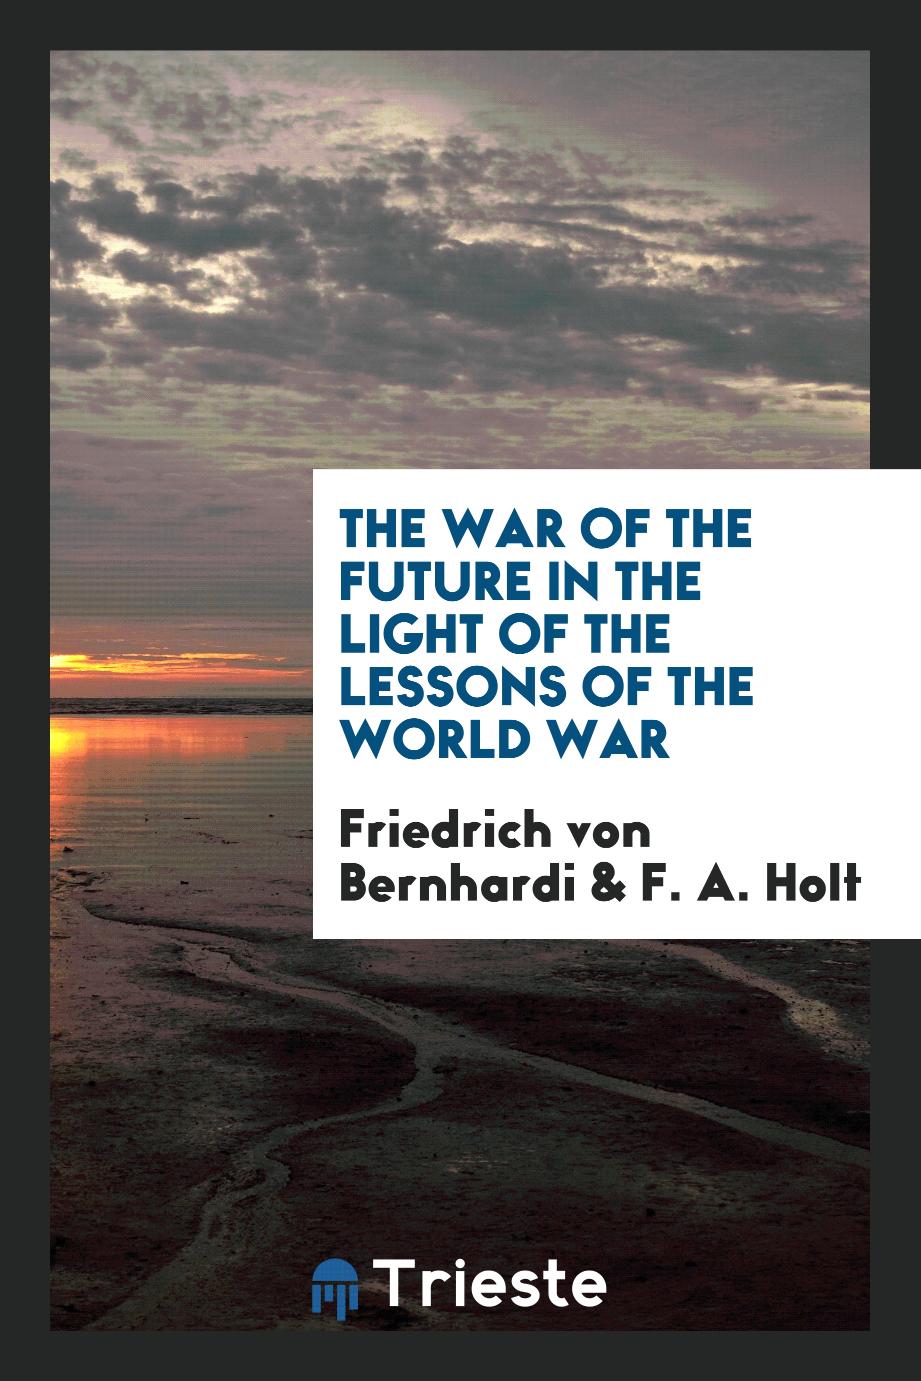 The war of the future in the light of the lessons of the World War